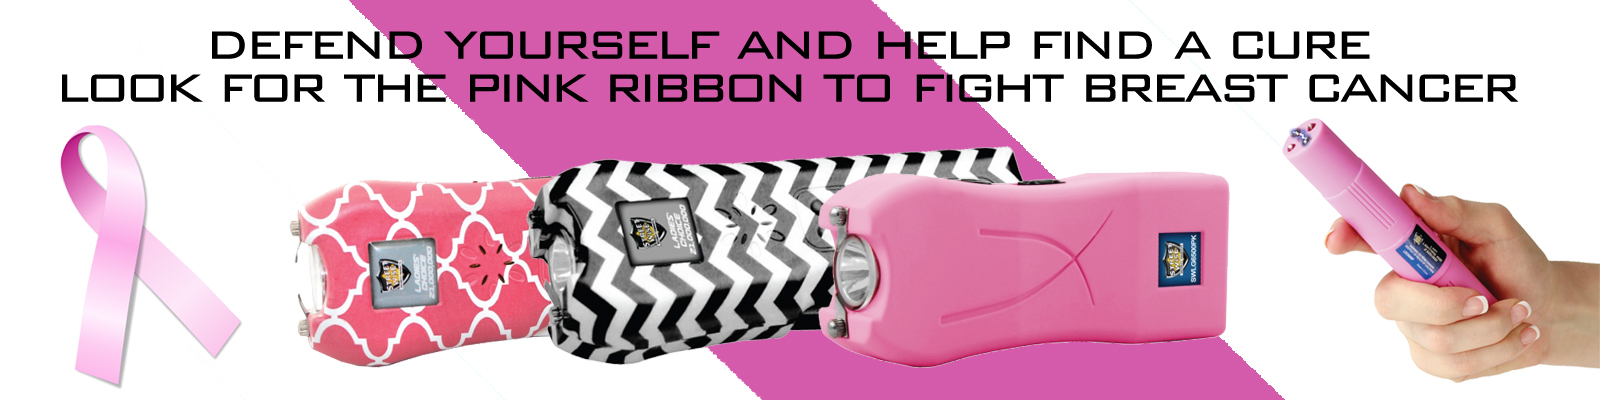 Help fight breast cancer by purchasing these products.